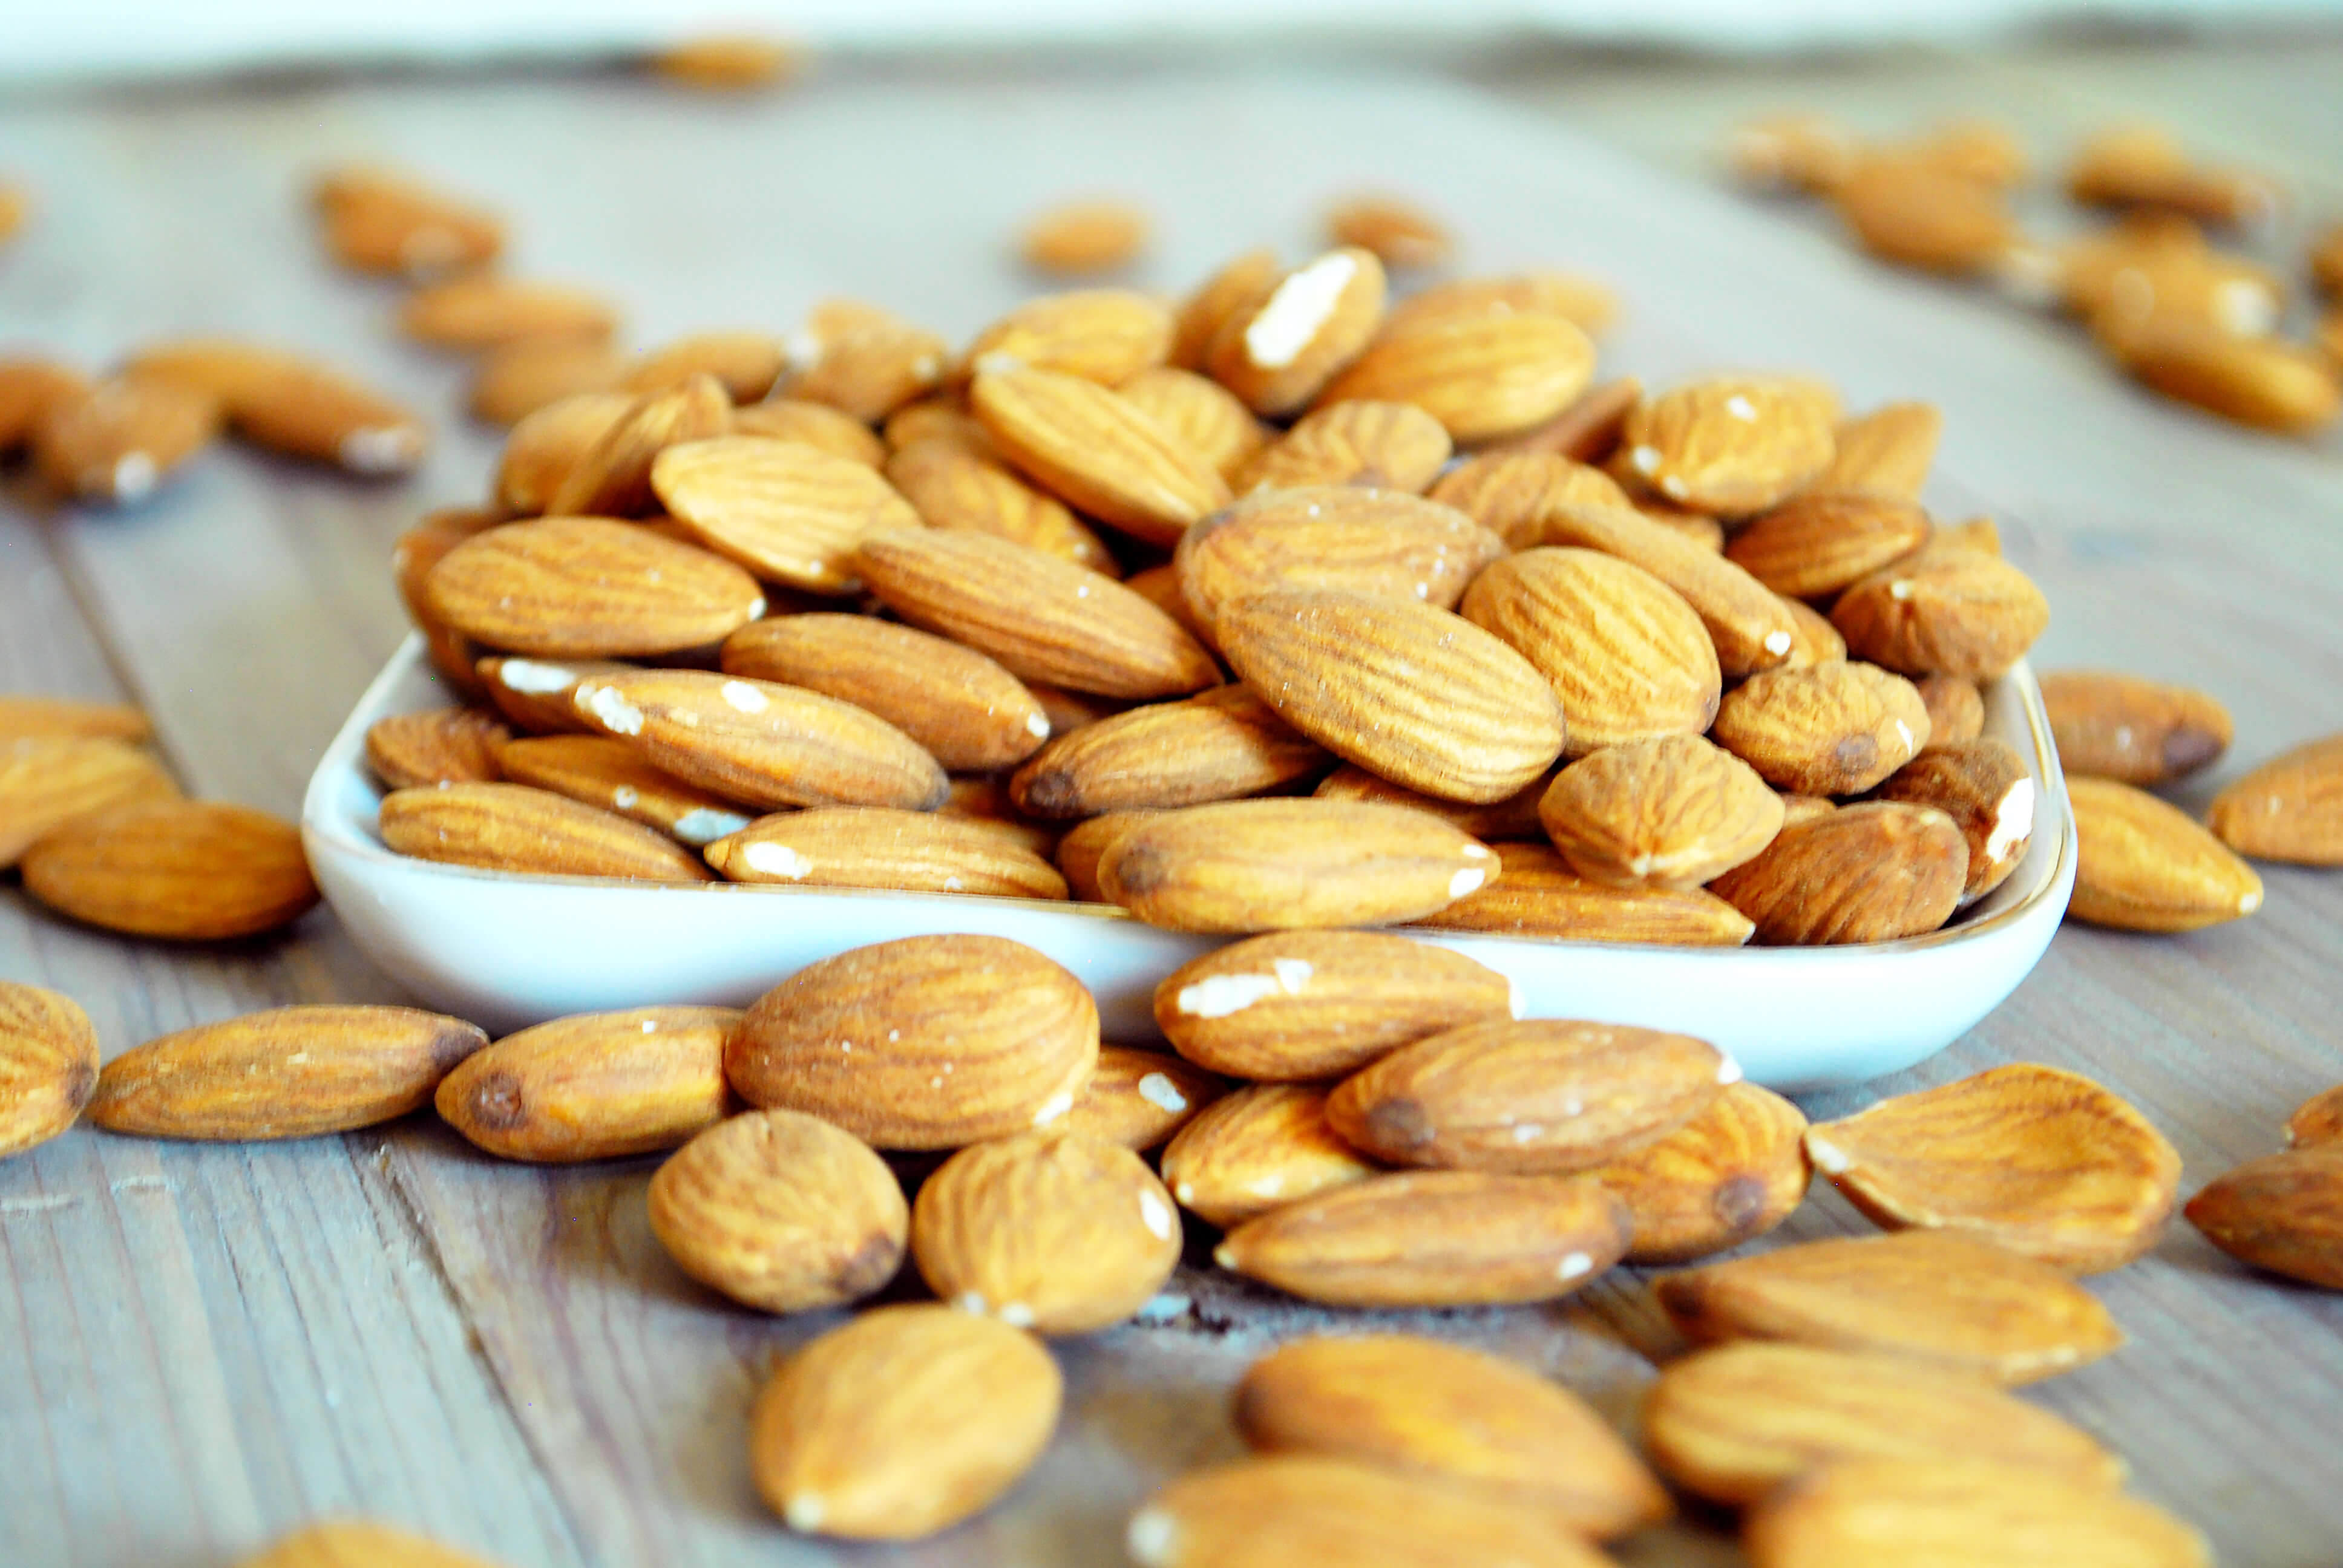 best nuts to eat for weight loss and health